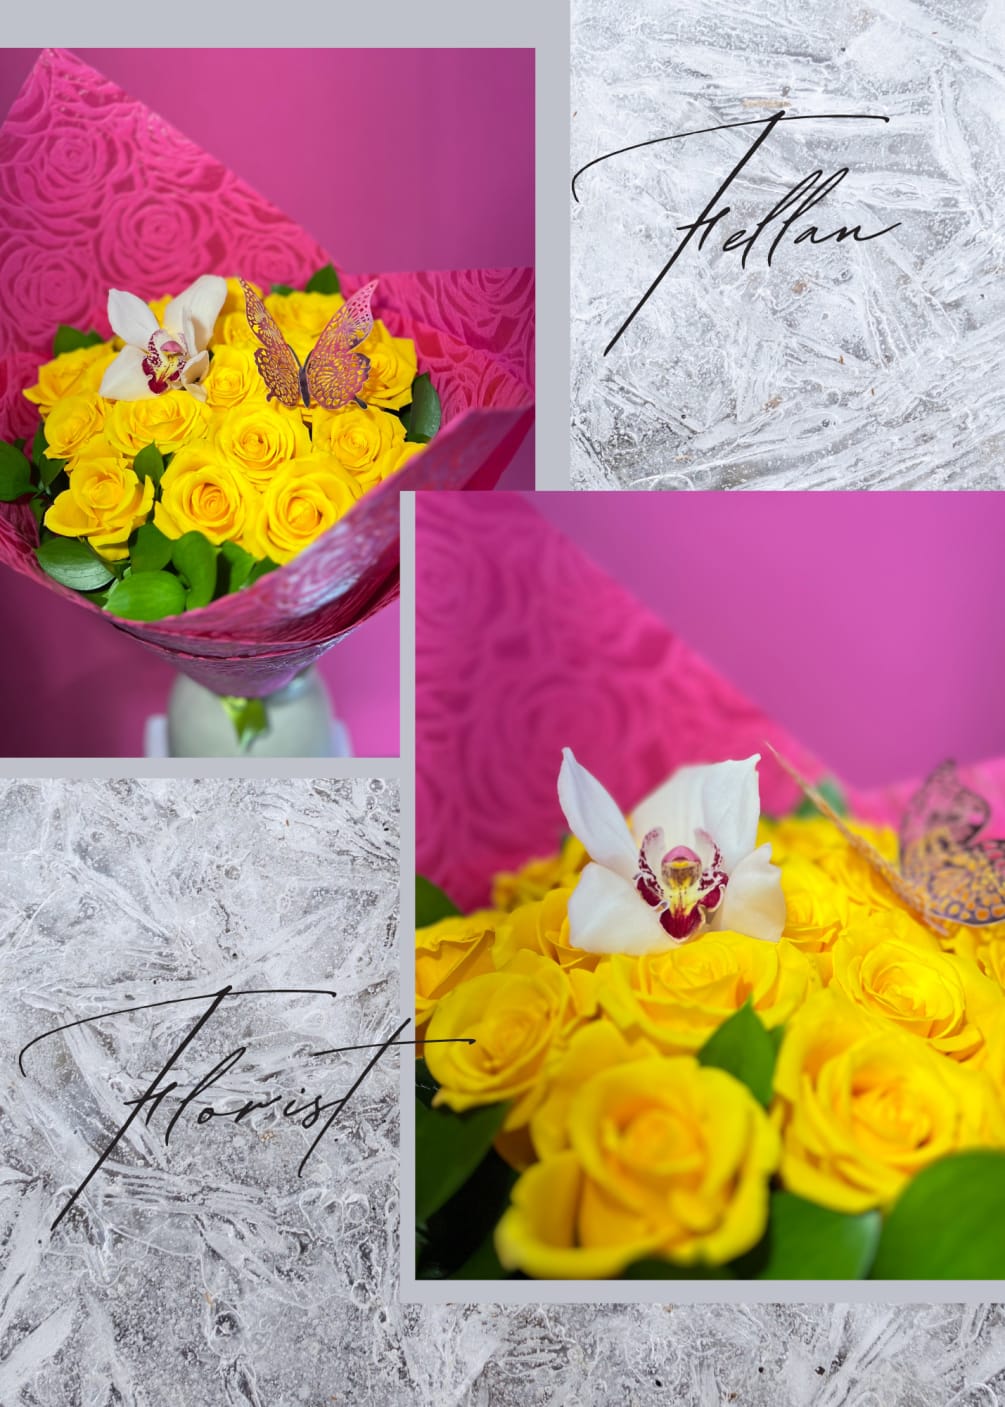 18 BEAUTIFUL YELLOW ROSES IN WRAPPING PAPER
&quot;CUT BOUQUET&quot;